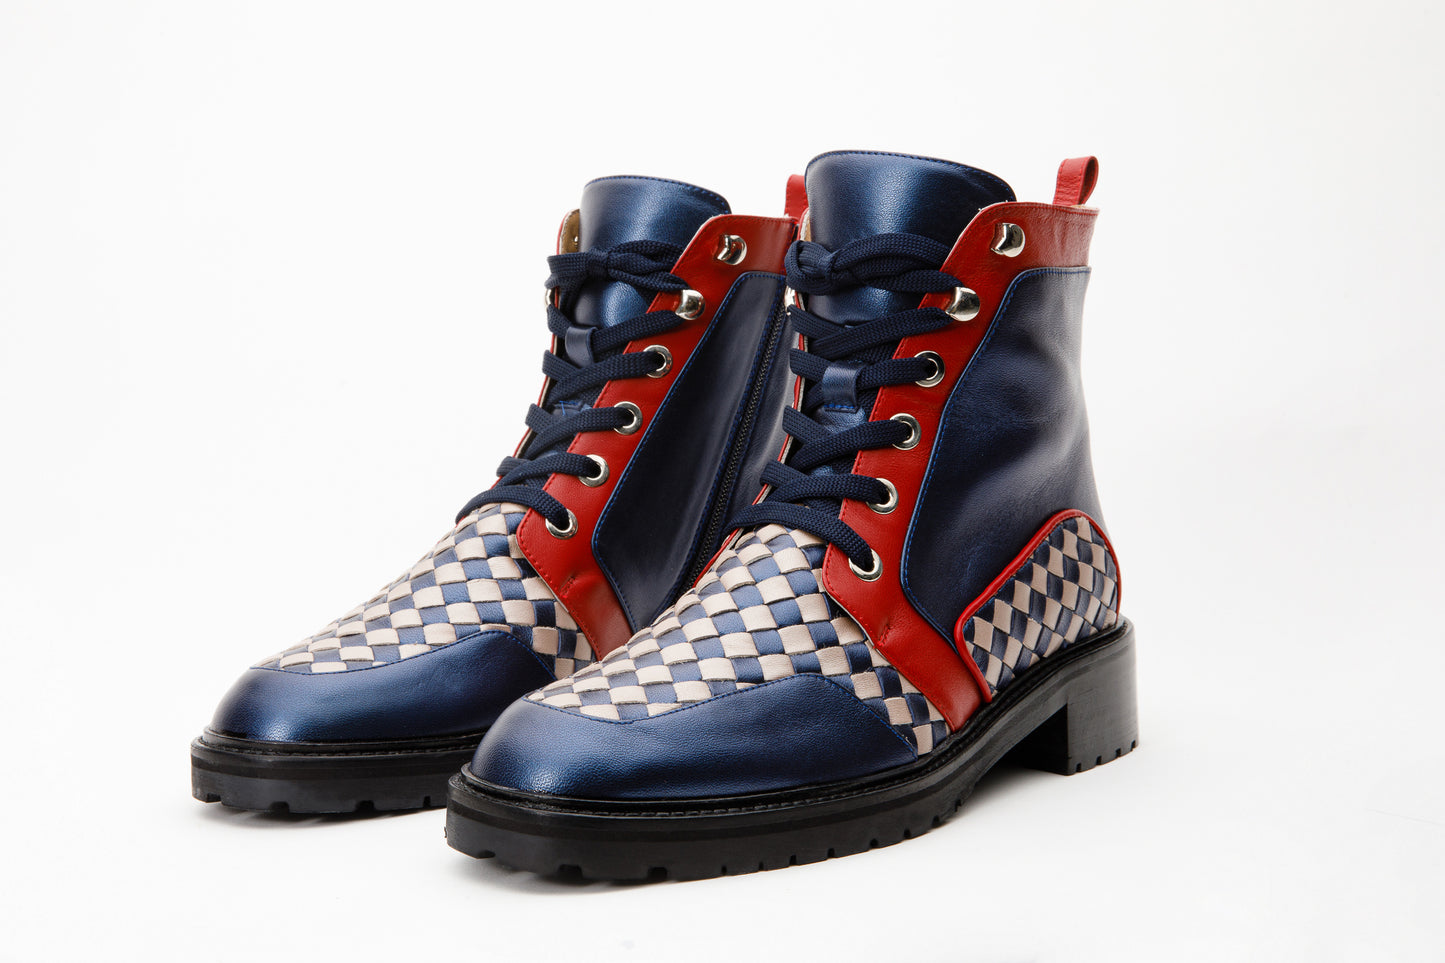 The Black River Navy Blue Handwoven Leather Ankle  Women  Boot